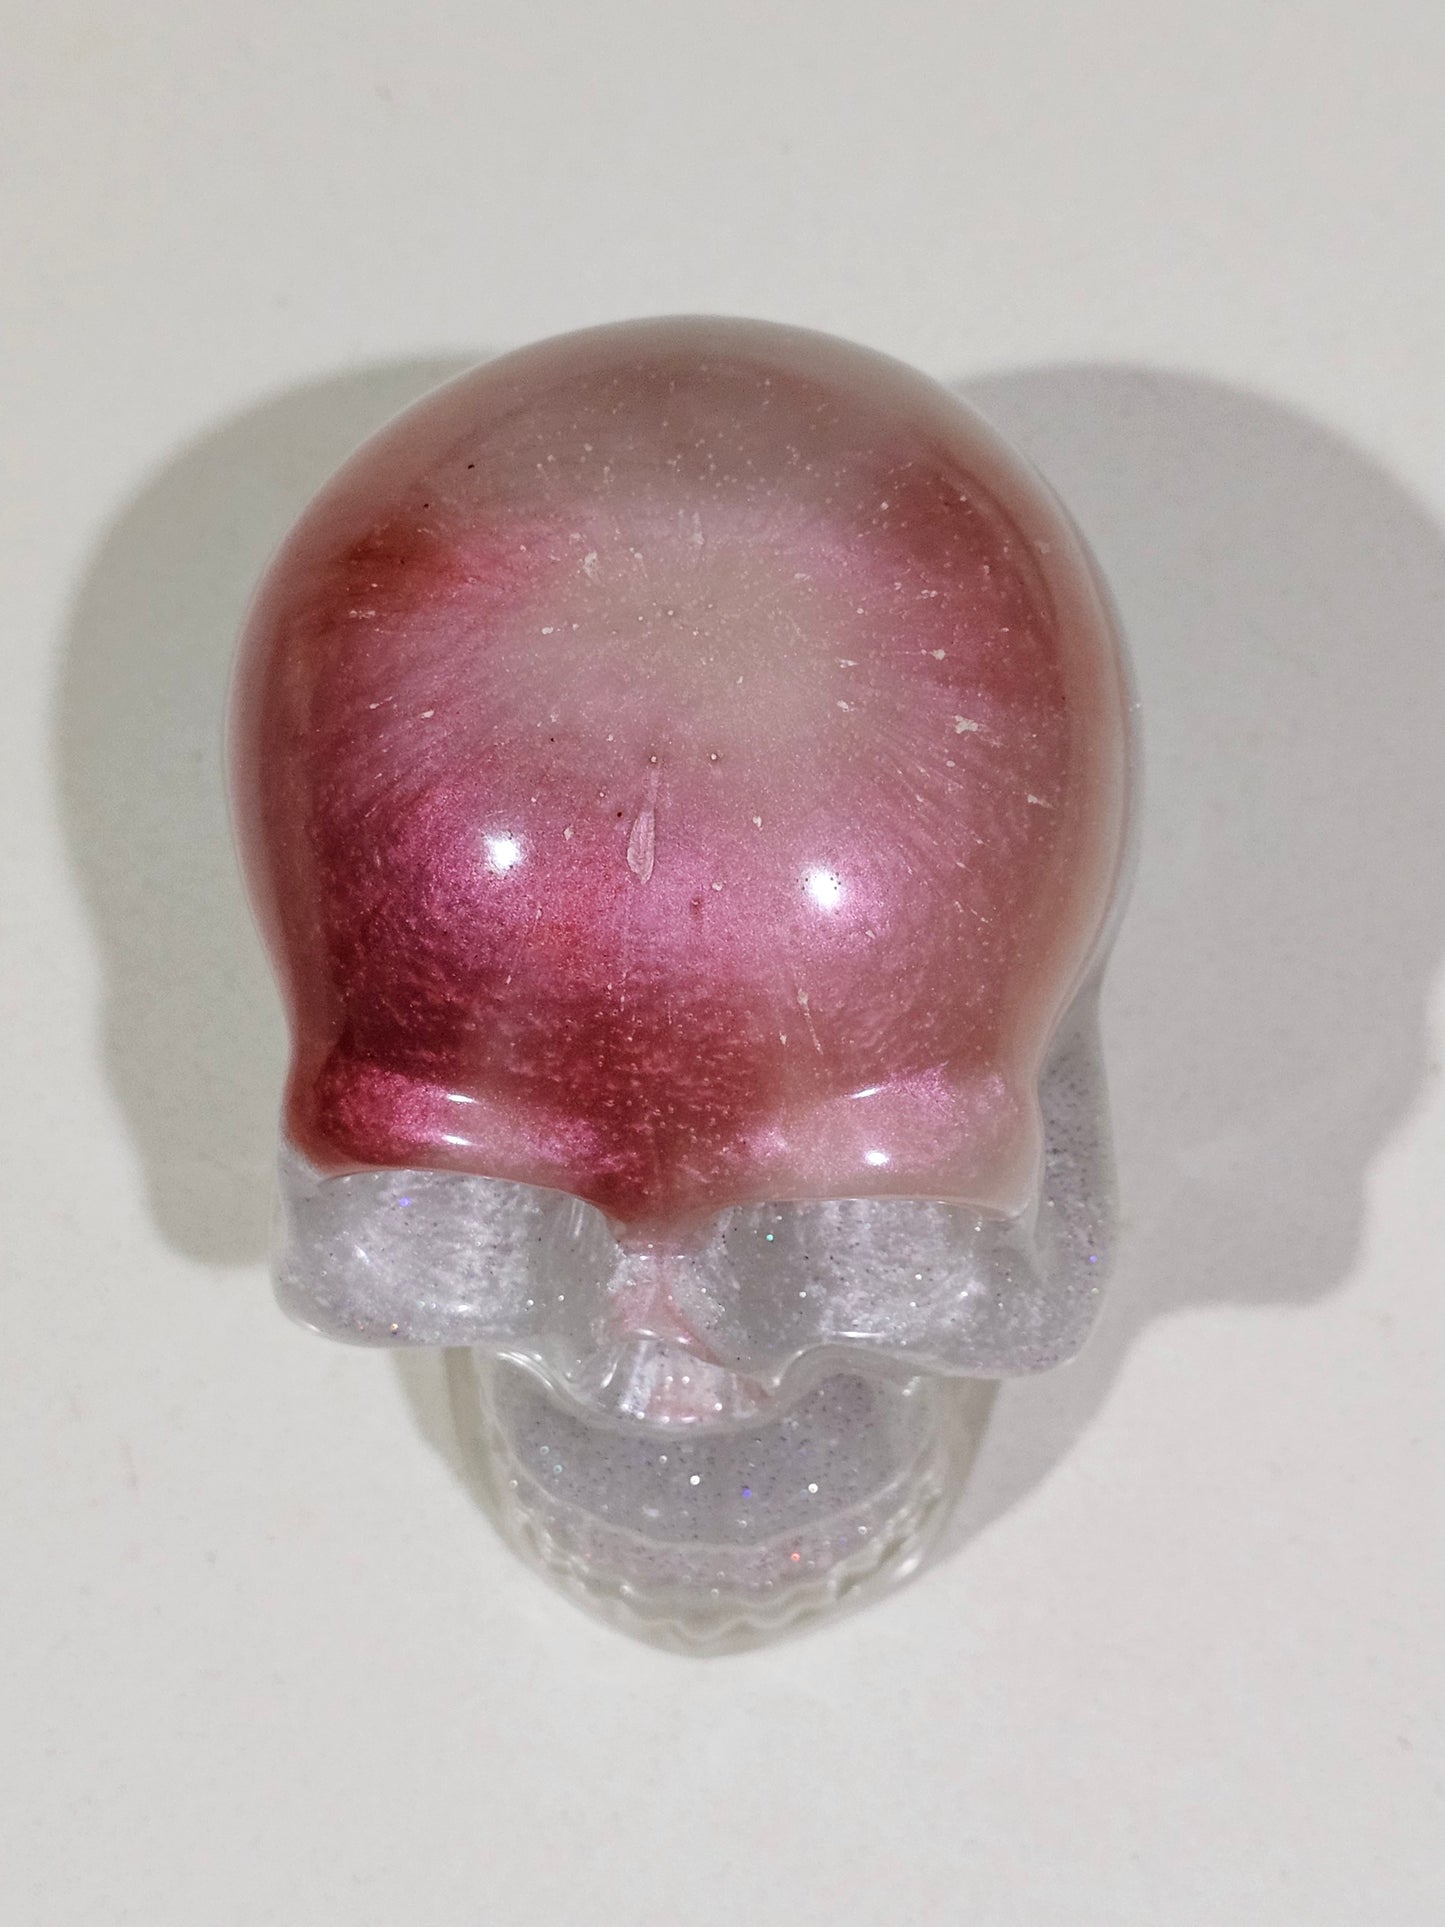 Skull - Pearl White w Pink